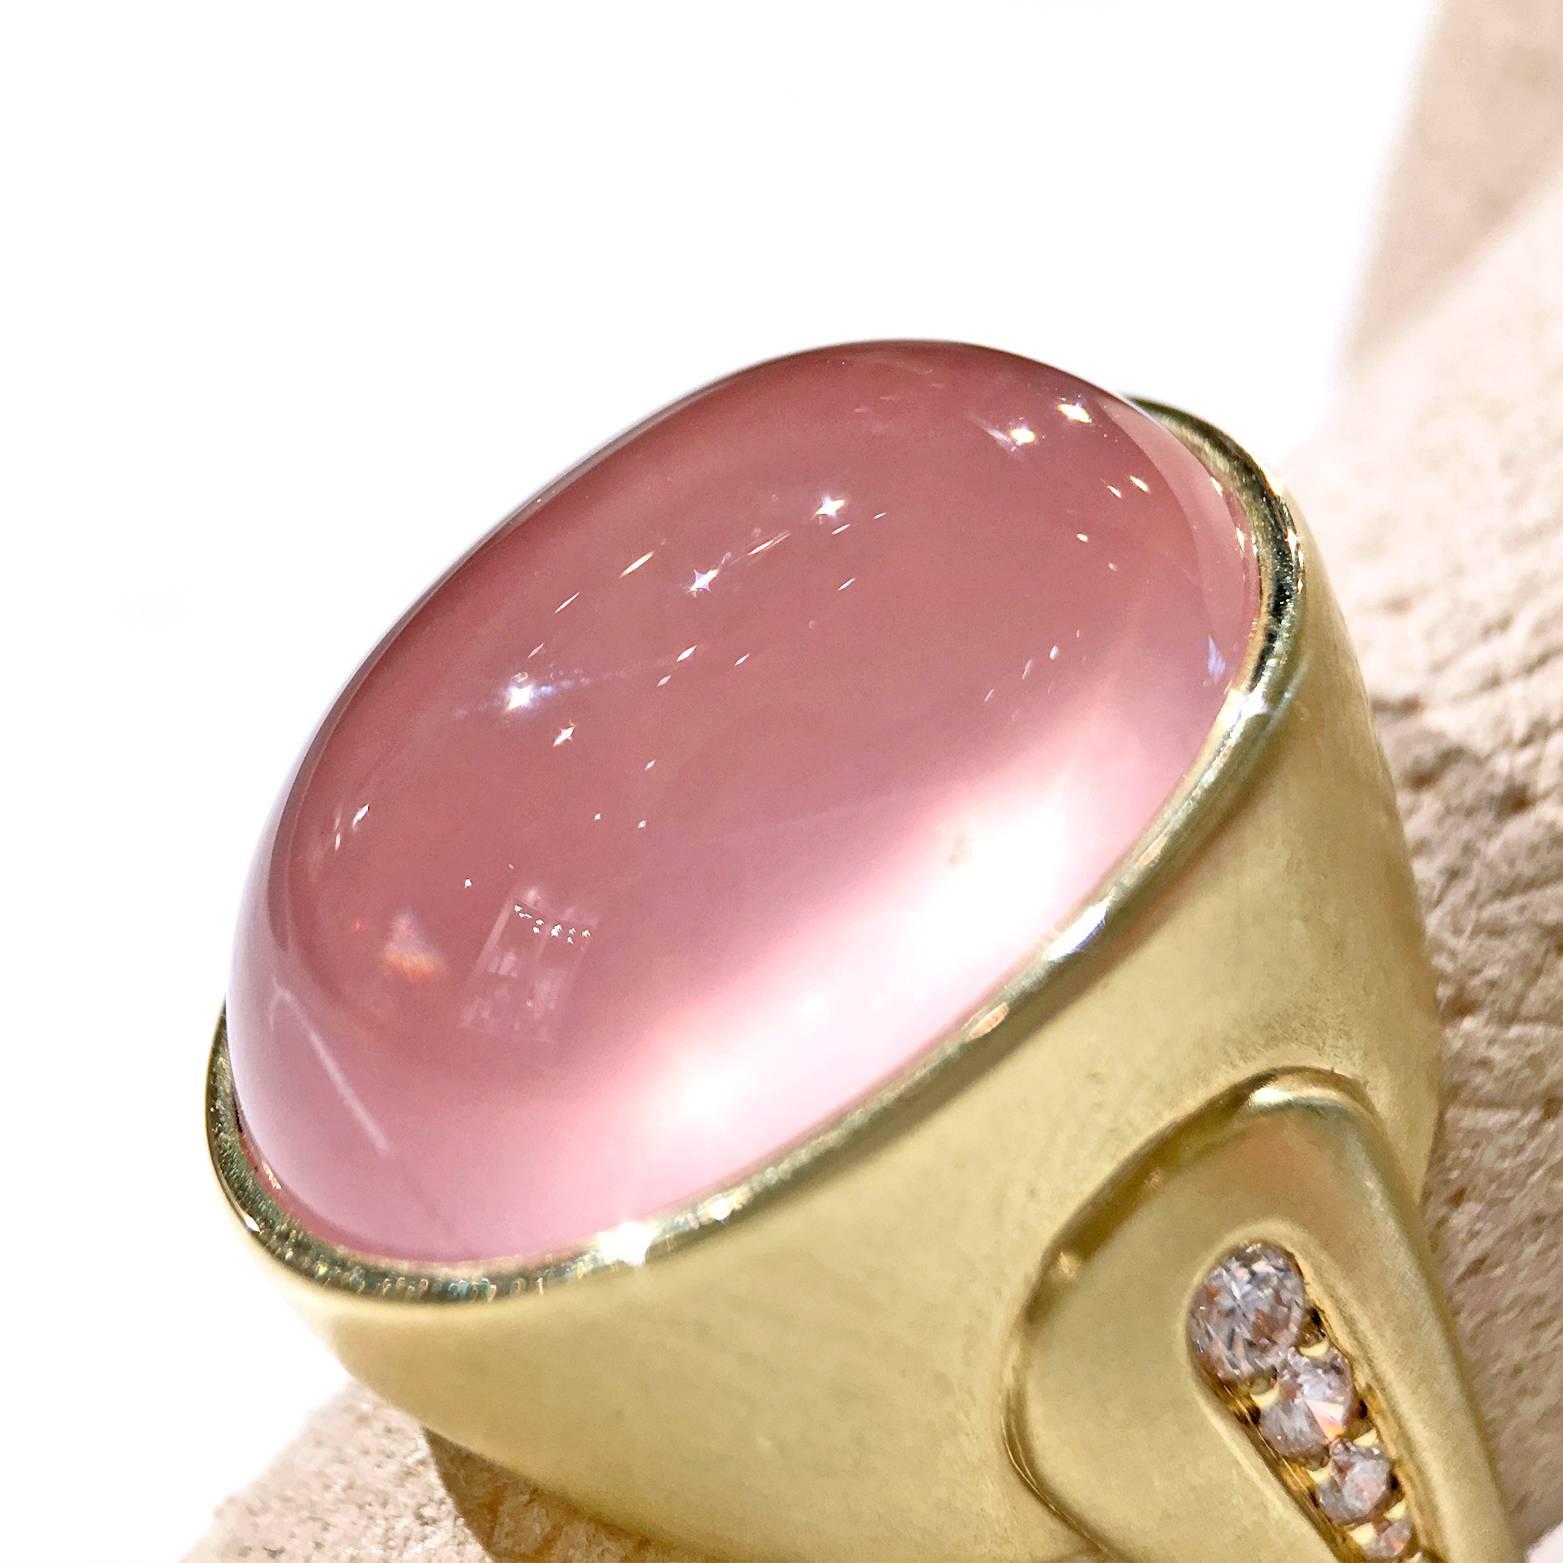 One of a Kind Dome Ring handcrafted in matte-finished 18.5k yellow gold featuring an 18.5 carat cabochon-cut rose quartz displaying understated star asterism. The band is accented with 0.24 total carats of F/vs2 round brilliant-cut white diamonds.